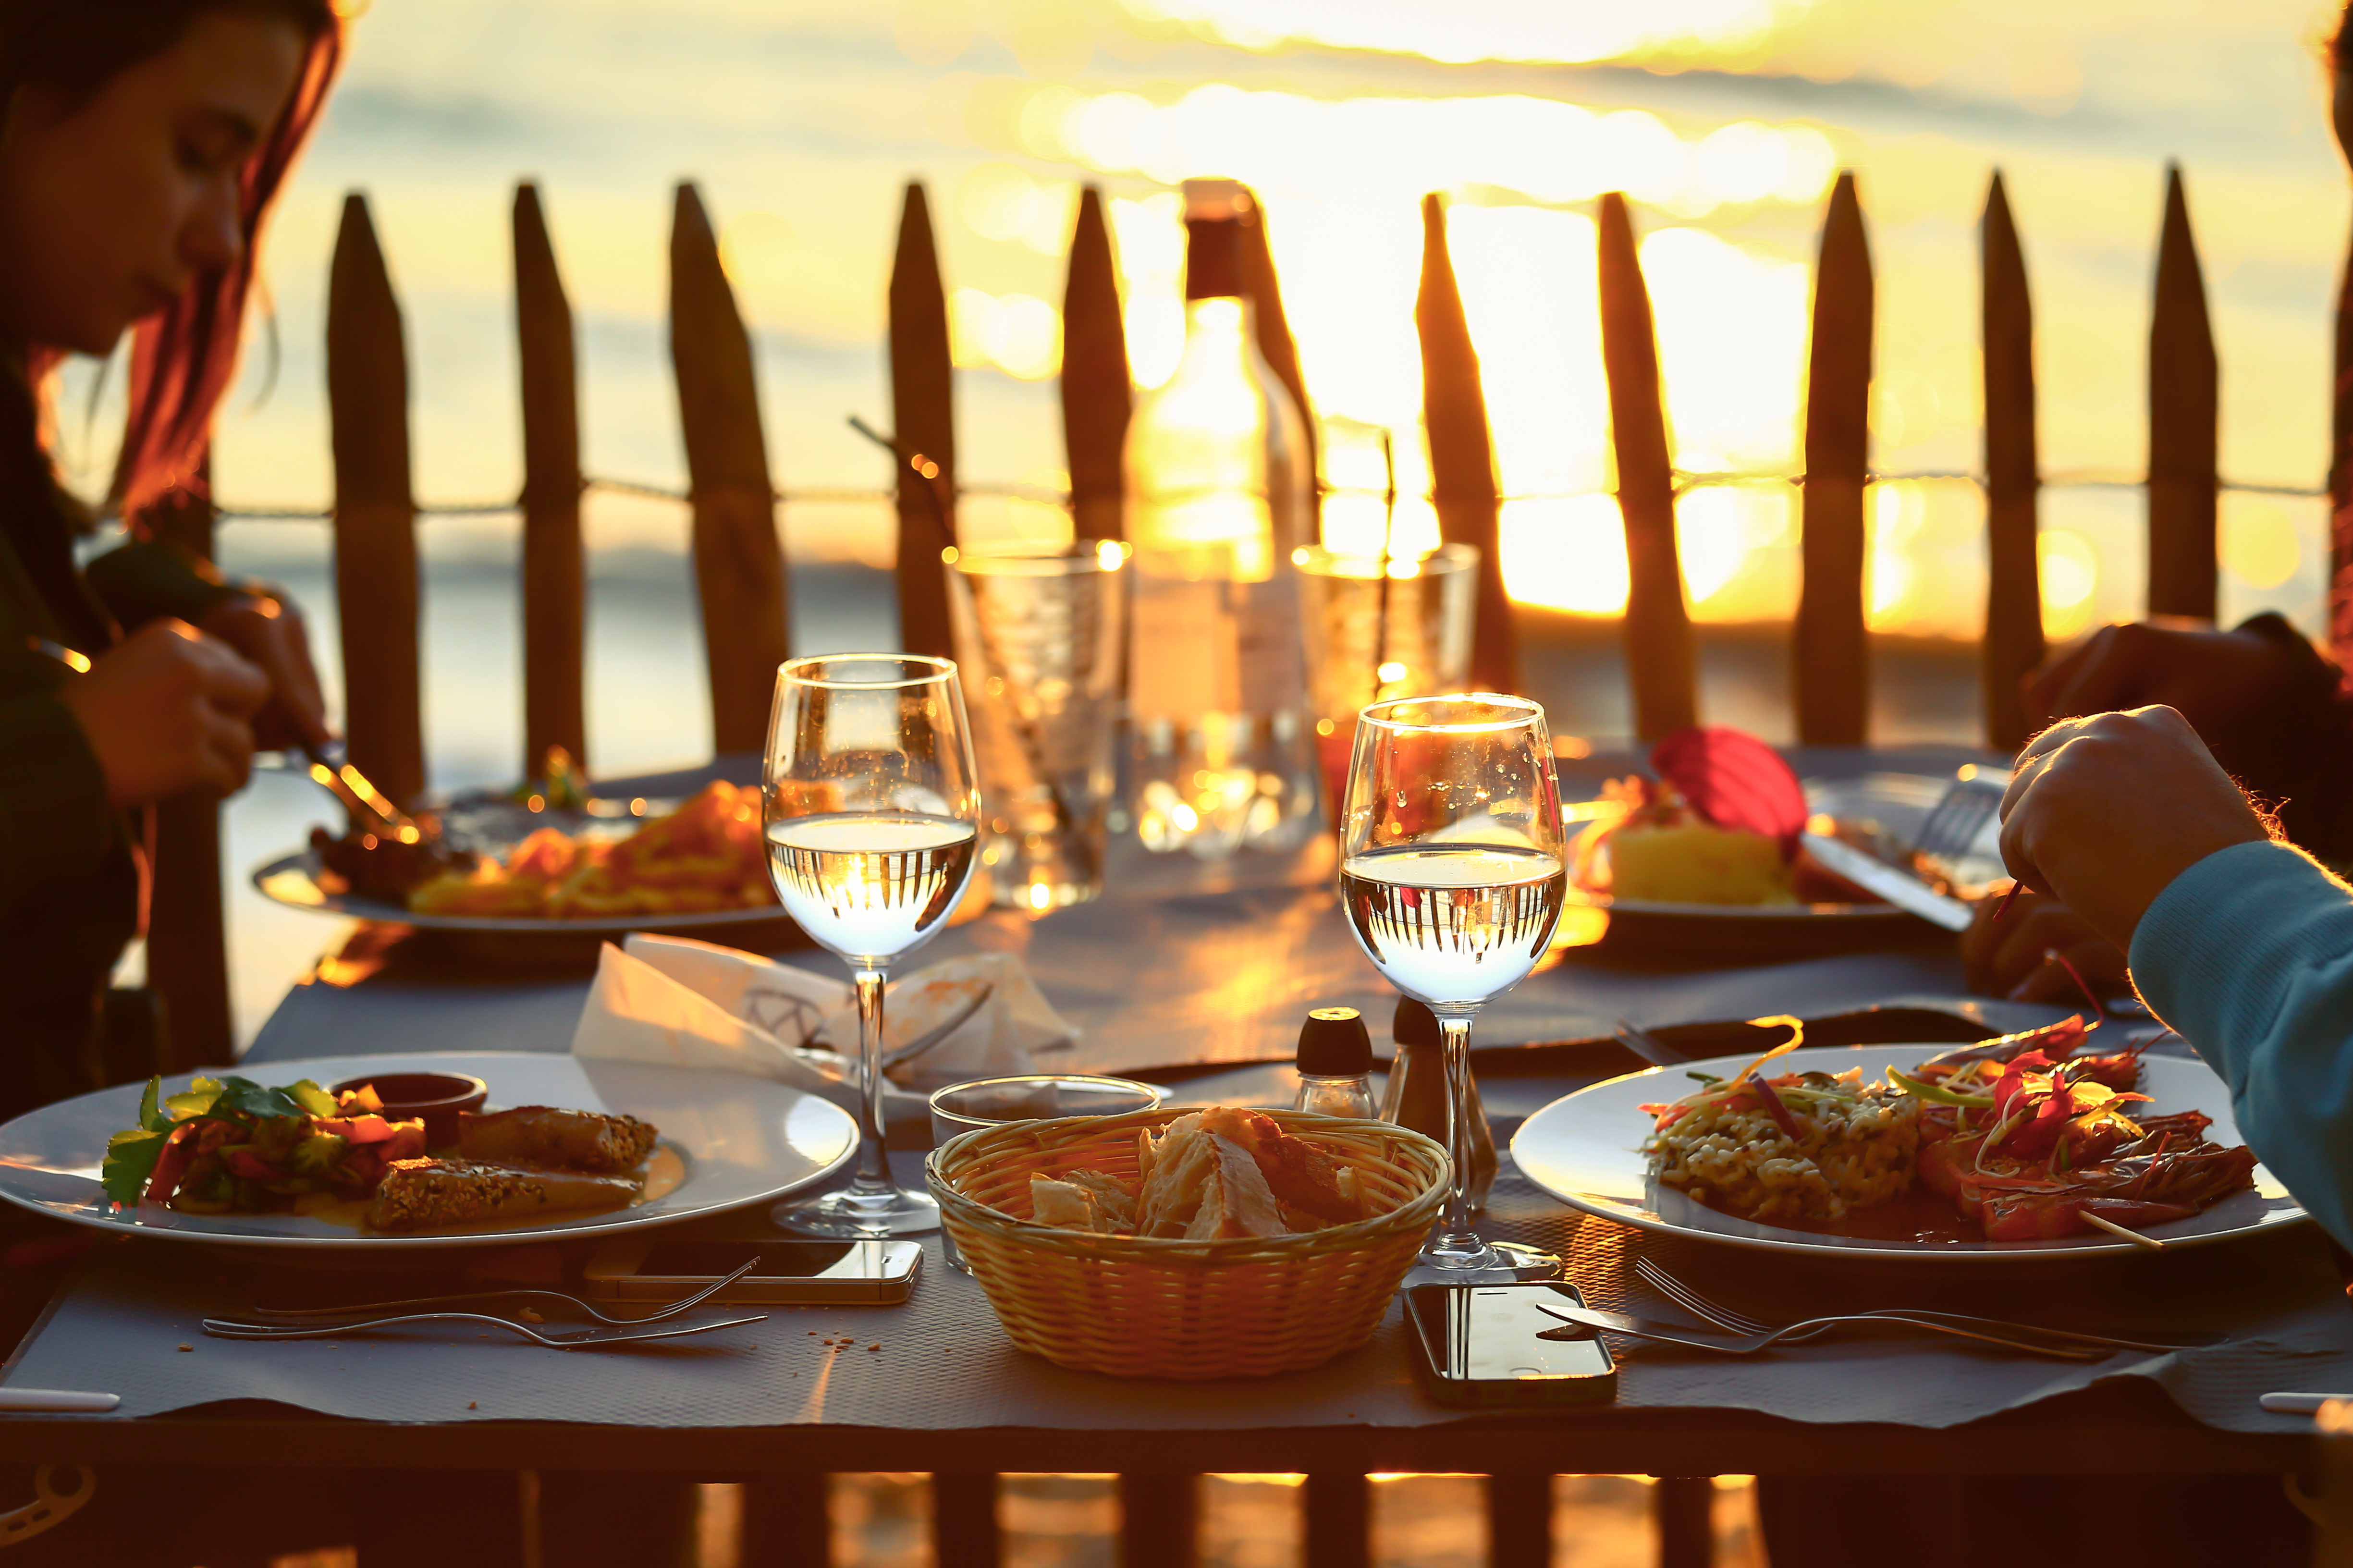 Dinner by the water | Source: Shutterstock